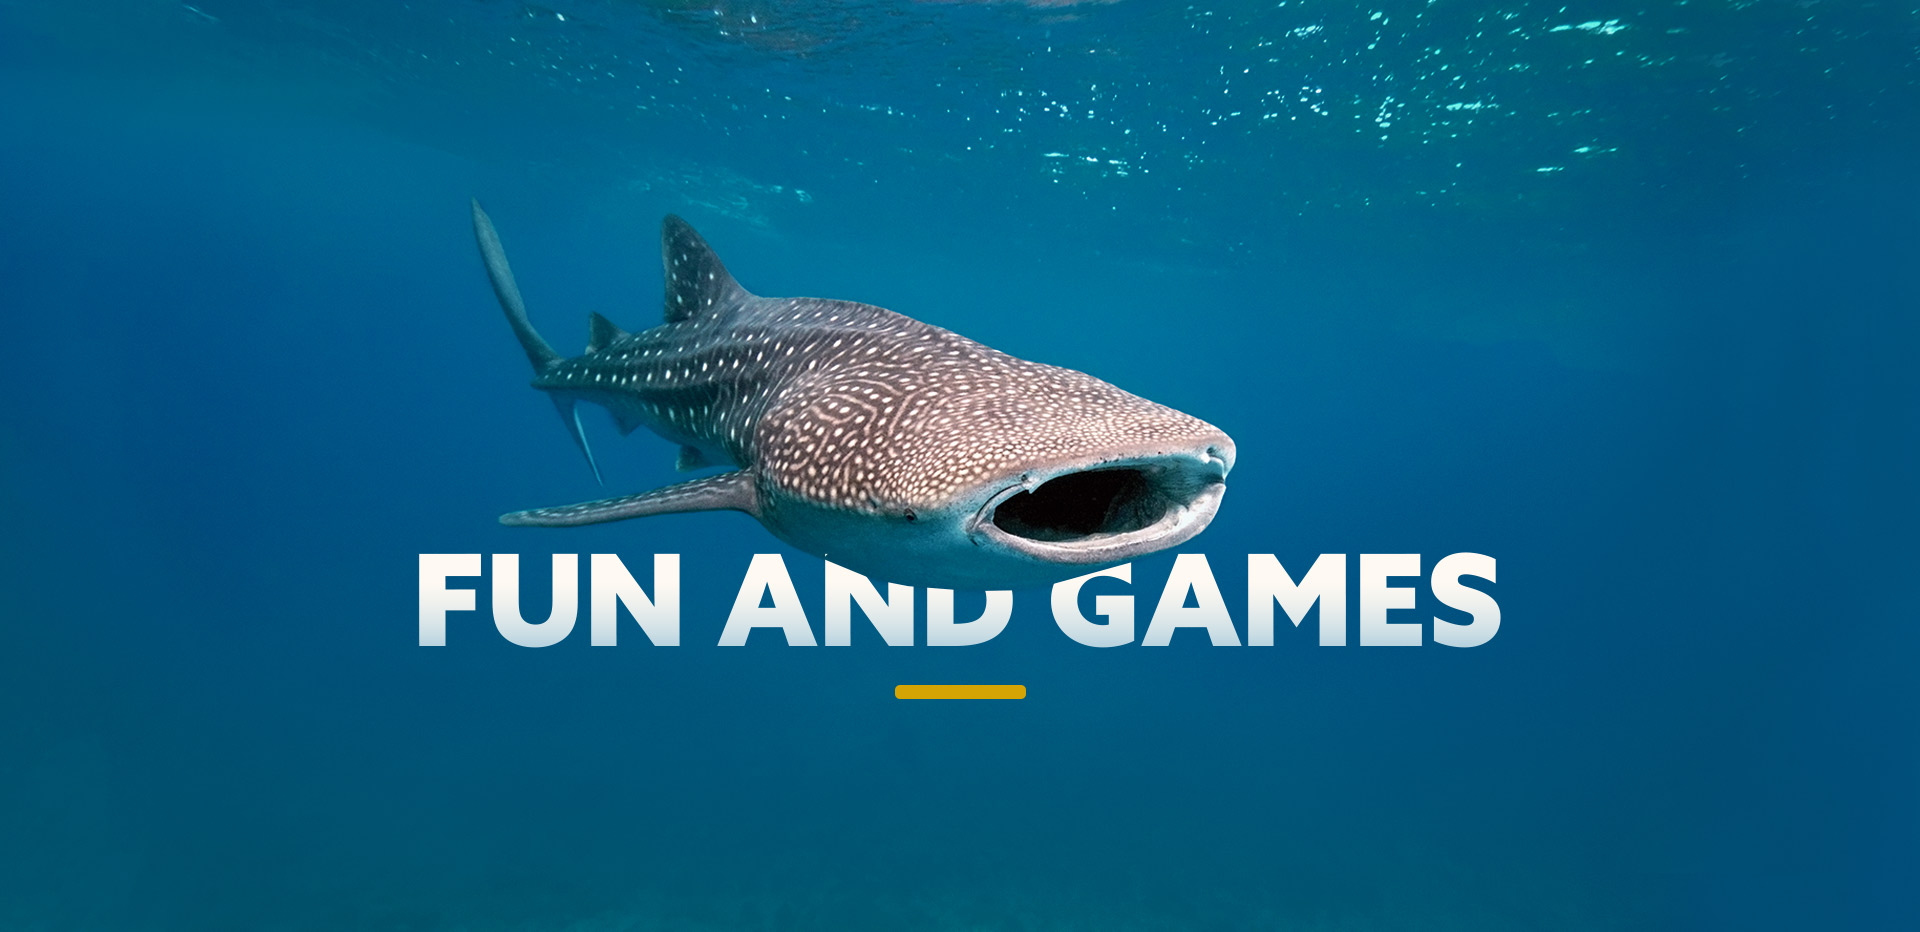 Fun And Games - Sharks Under Attack Campaign